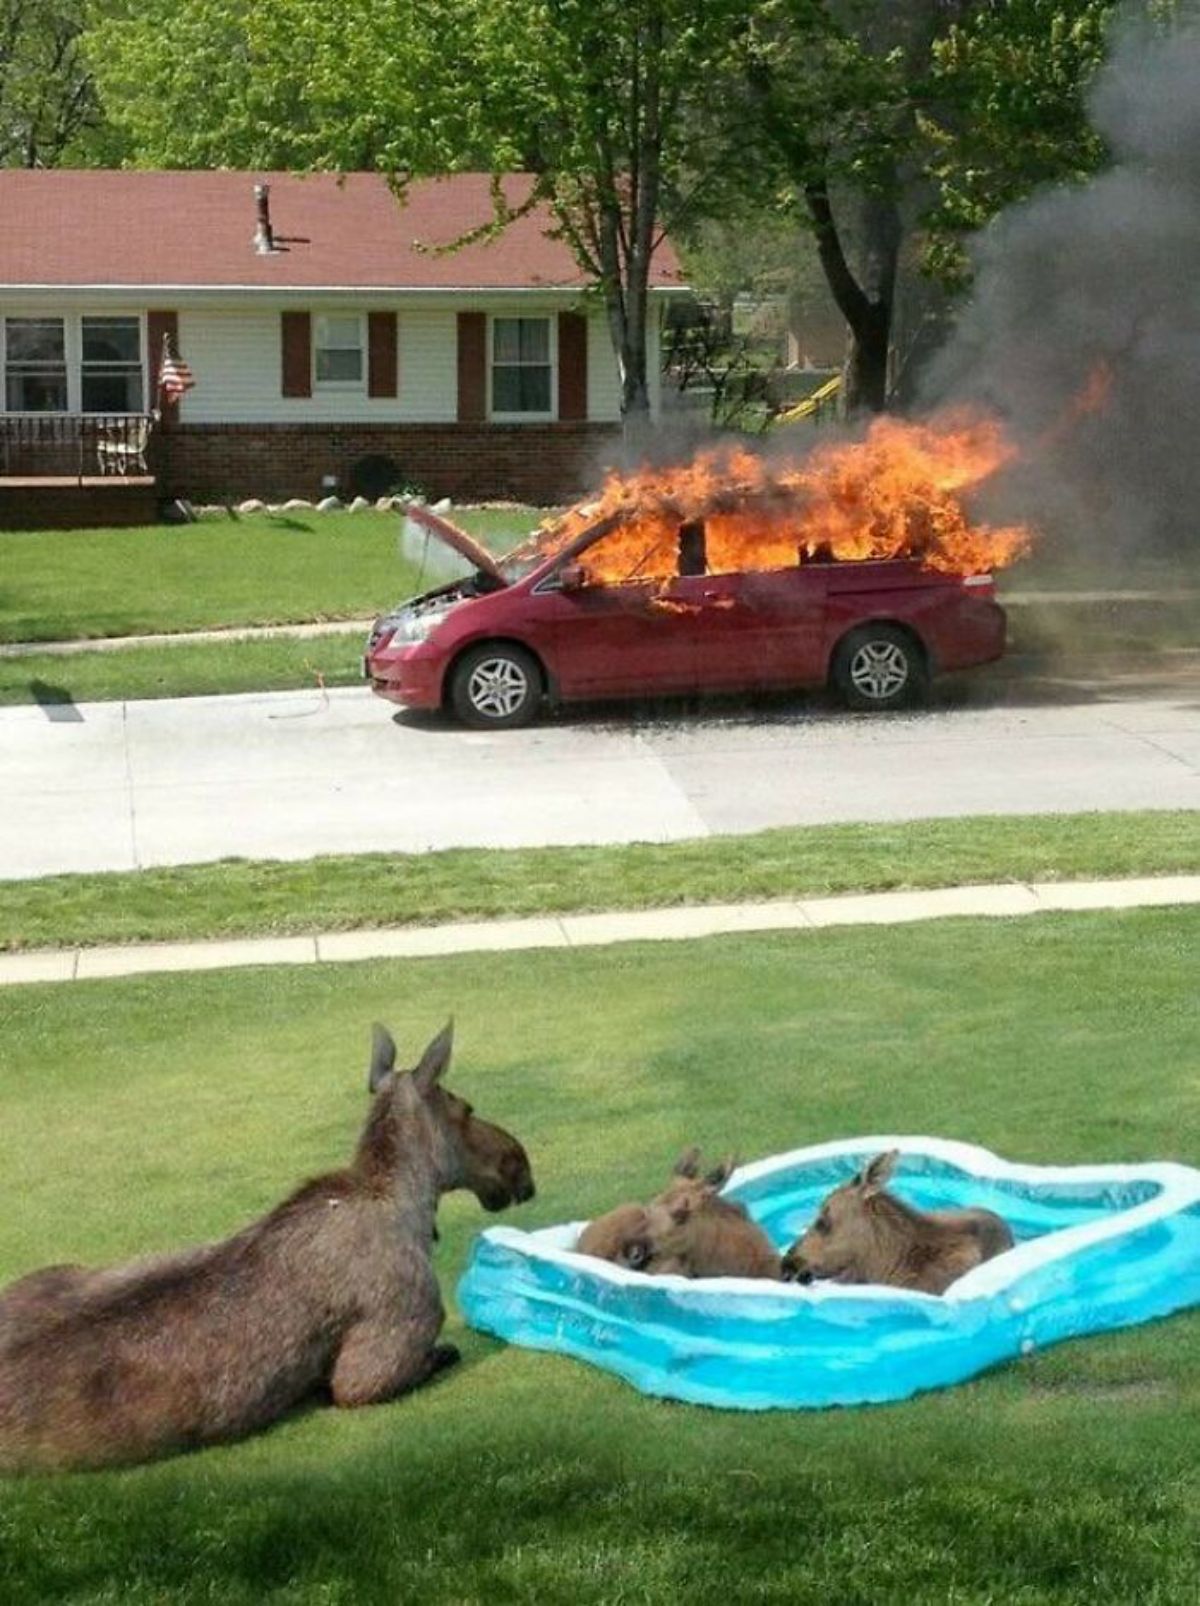 red car parked on the street on fire with a moose laying on a lawn next to 2 calves in a blue kiddie pool